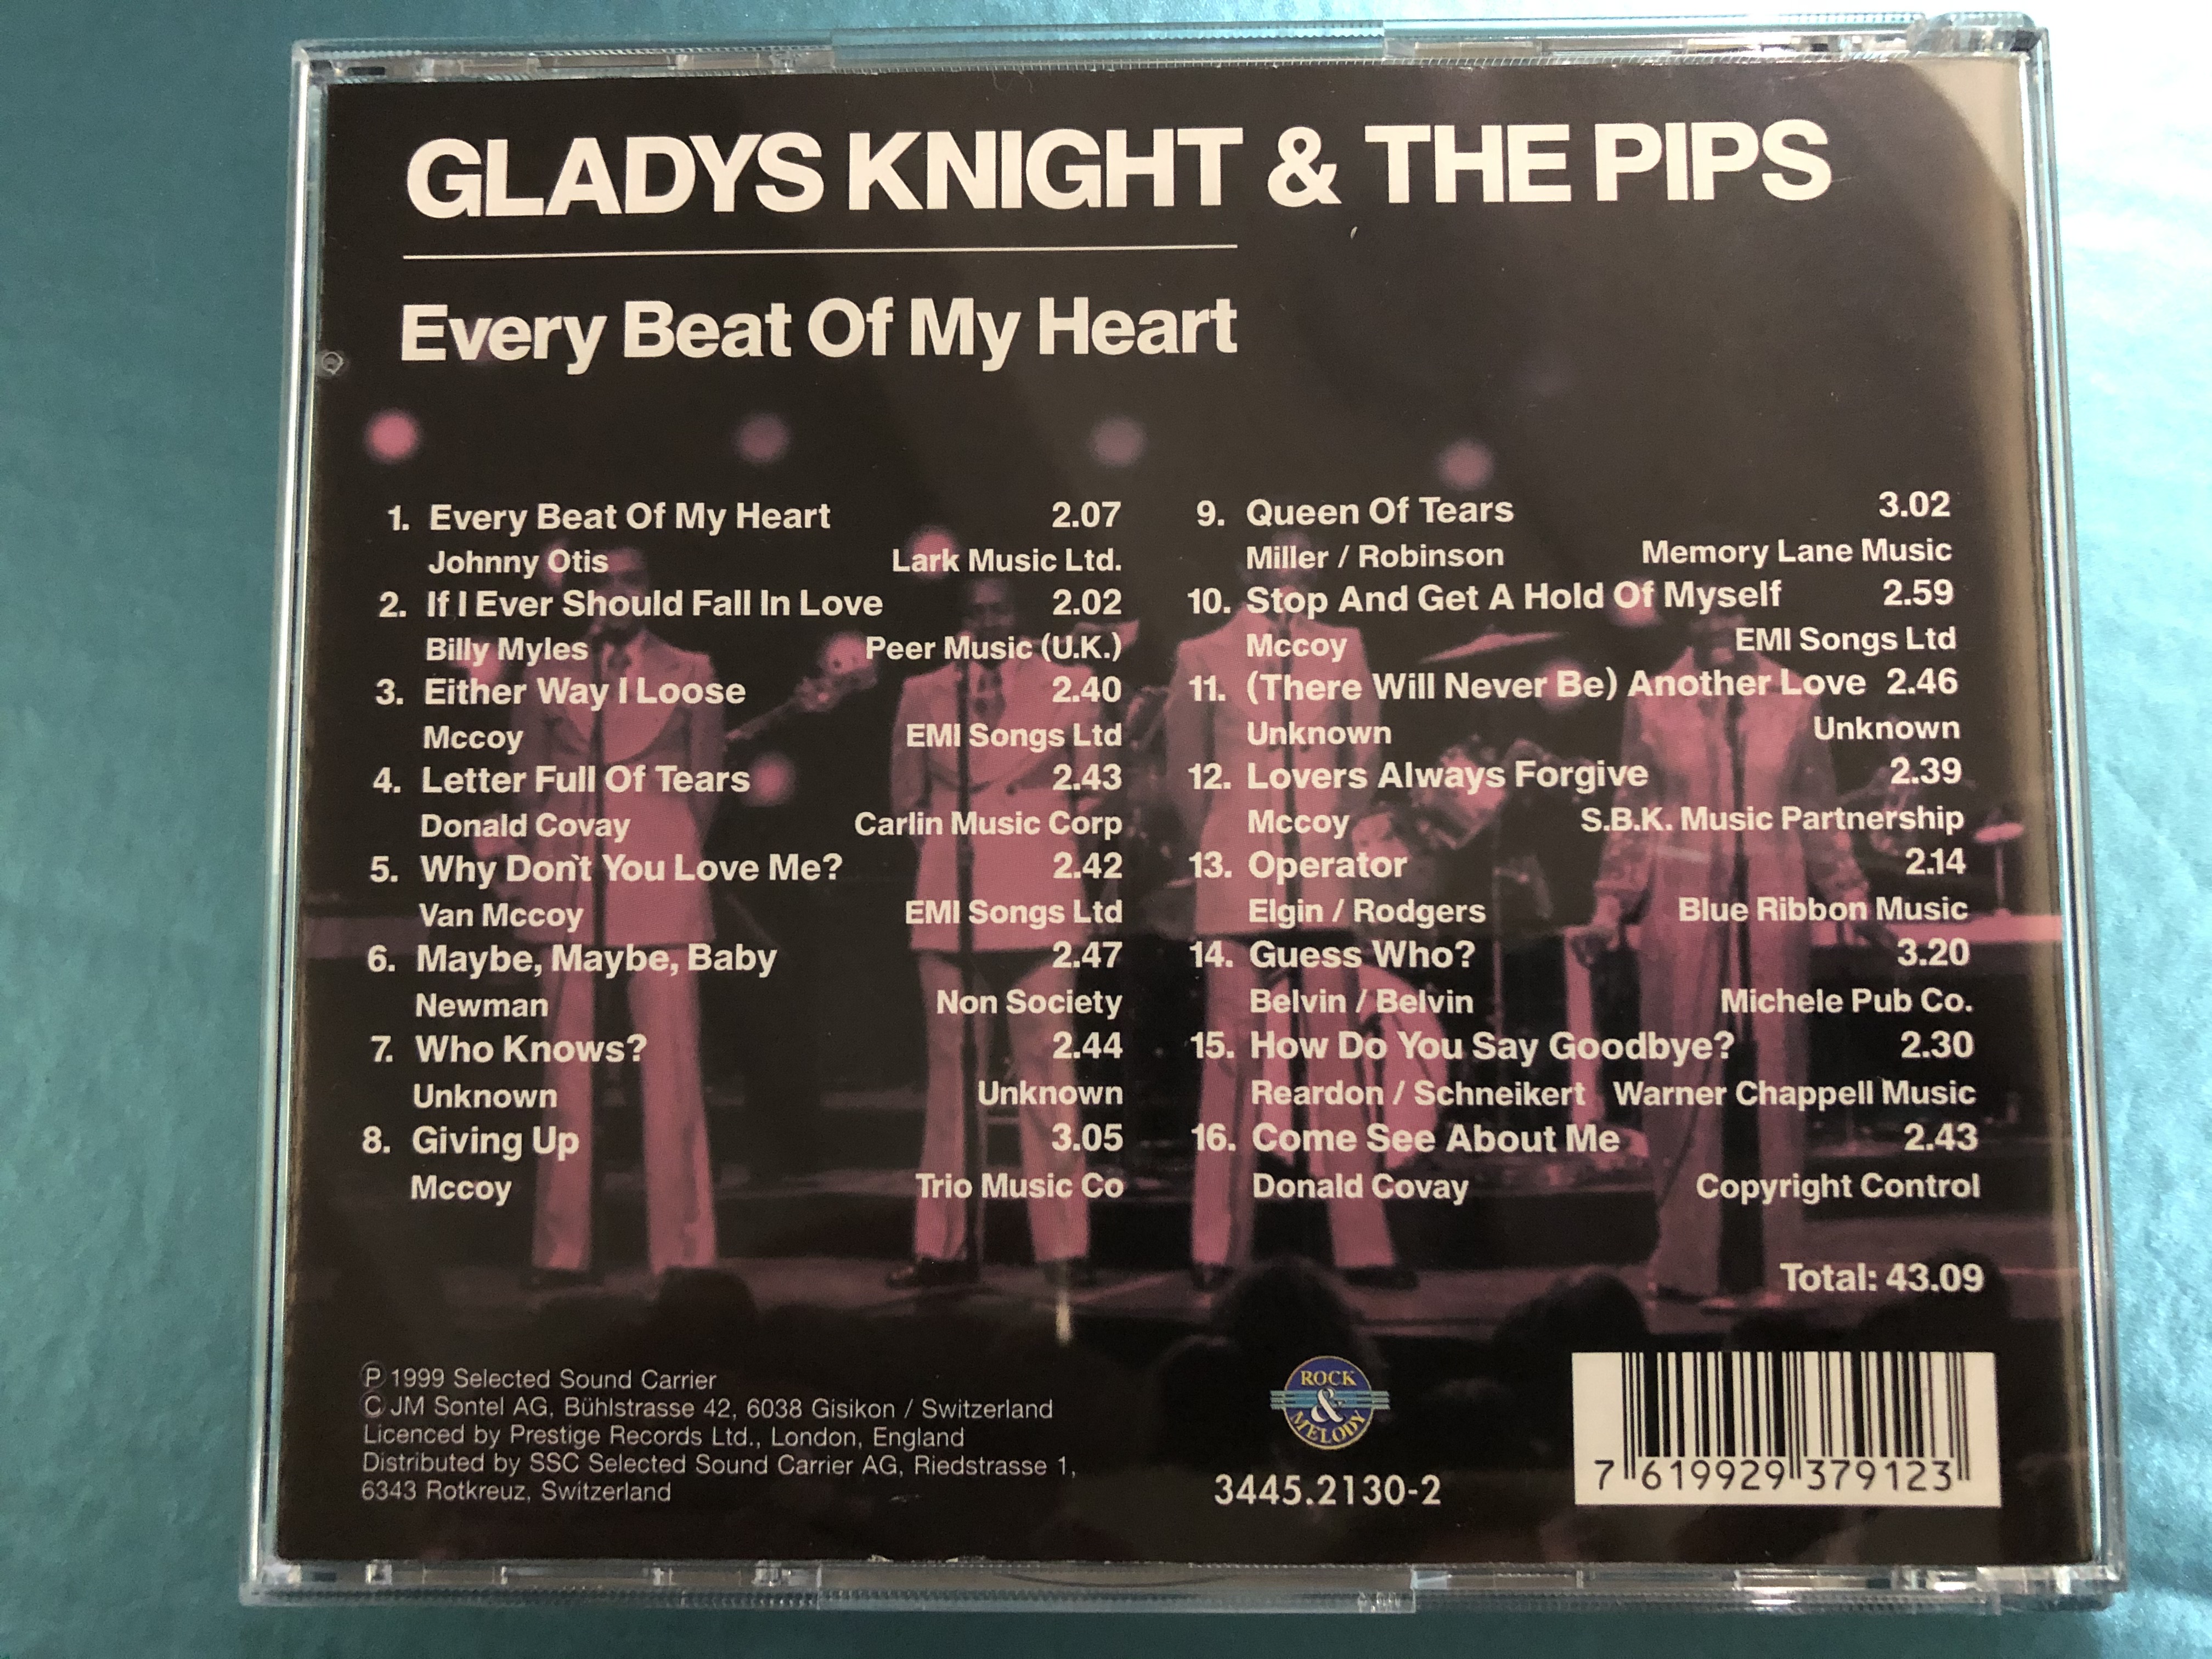 gladys-knight-and-the-pips-every-beat-of-my-heart-letter-full-of-tears-maybe-maybe-baby-operator-come-see-about-me-lovers-always-forgive-stop-and-get-a-hold-of-myself-and-many-other.jpg